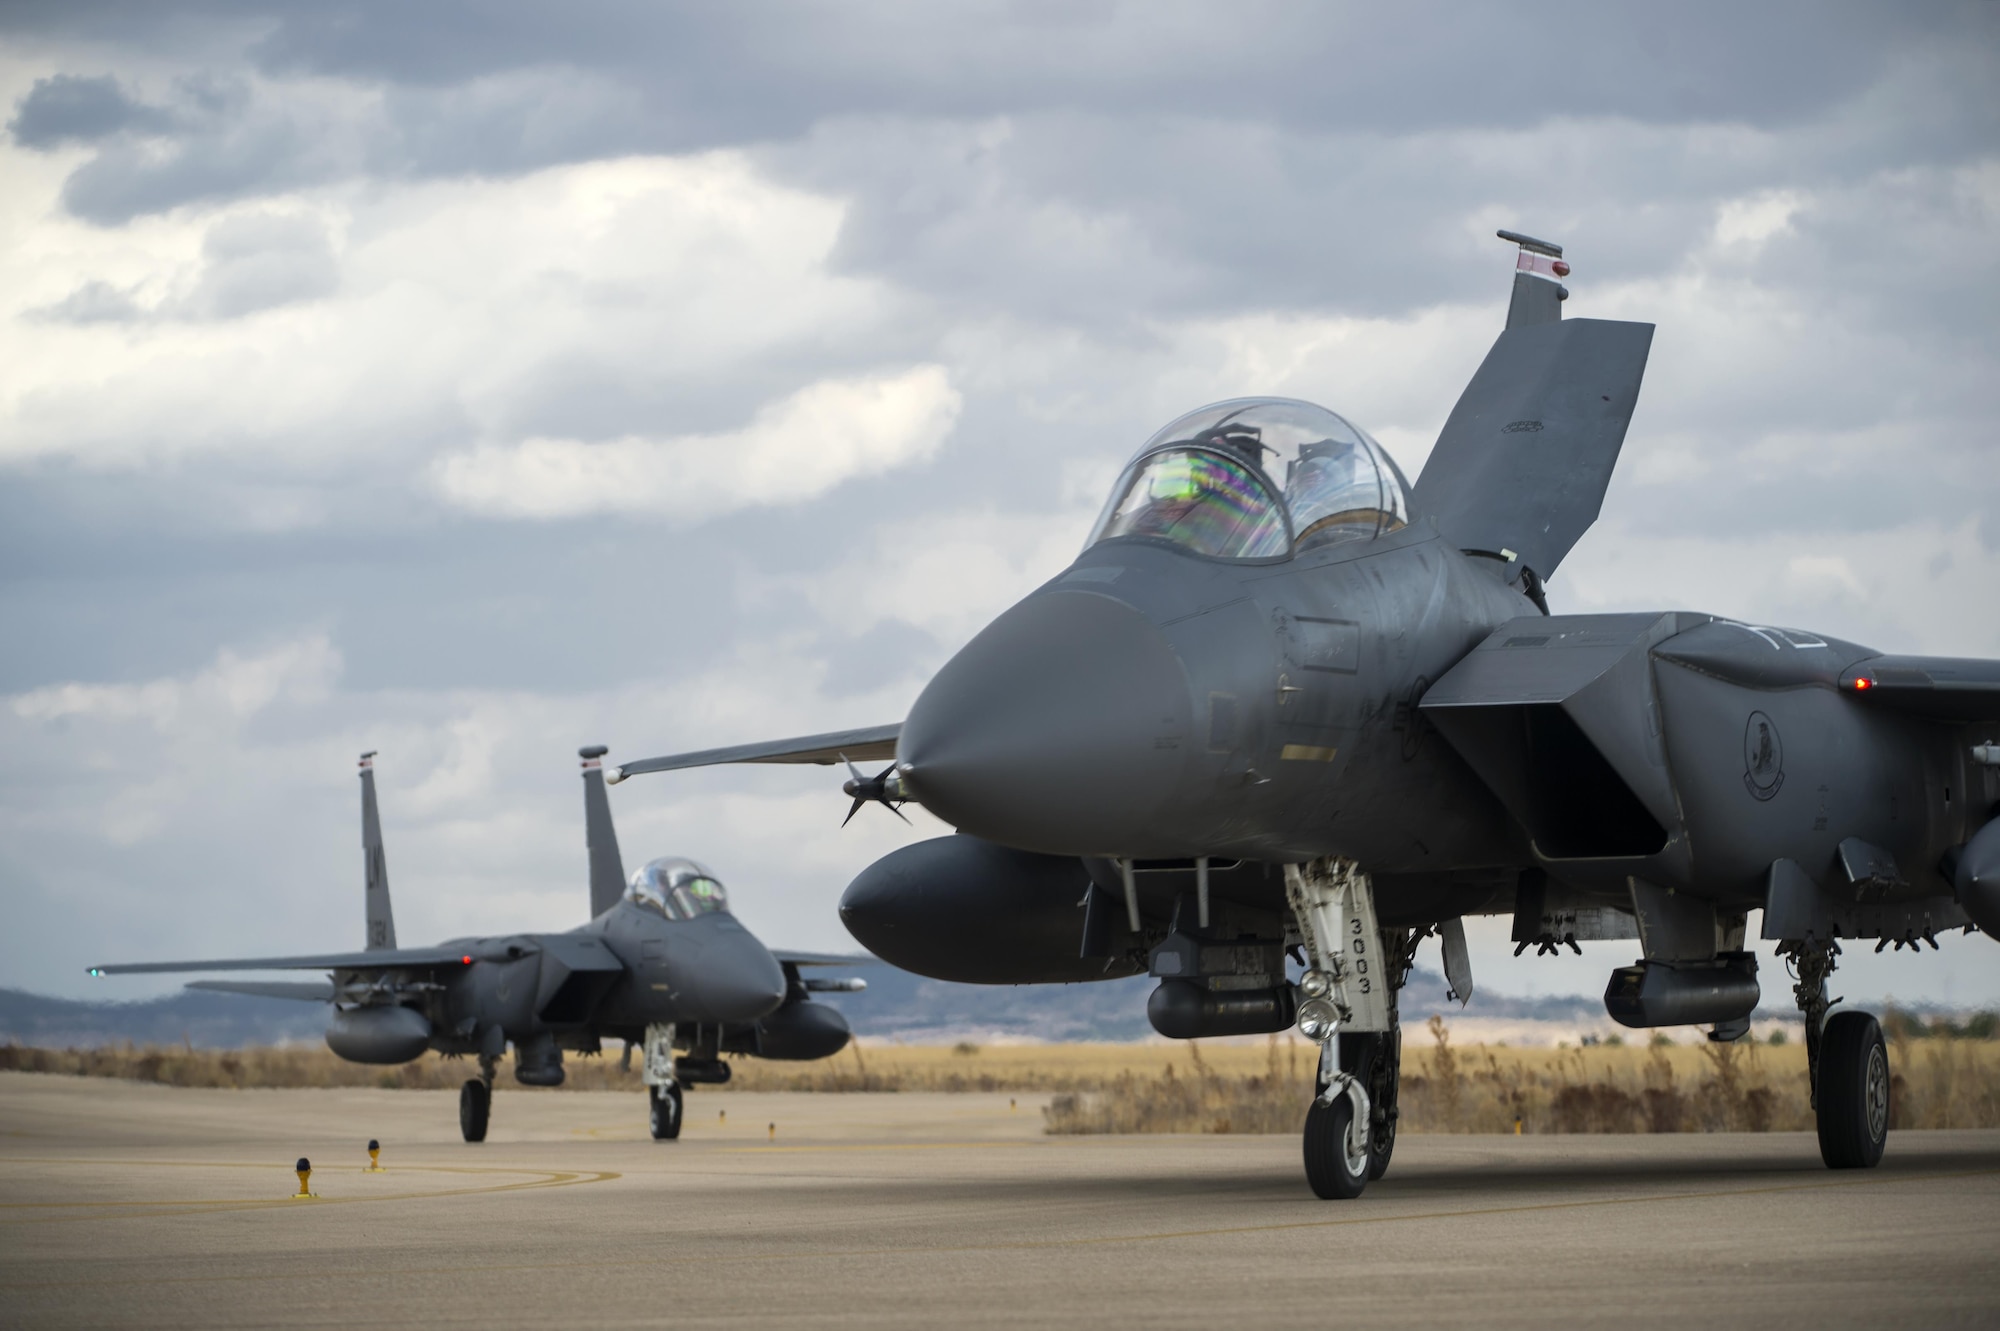 F-15E Strike Eagles, assigned to the 494th Fighter Squadron from Royal Air Force Lakenheath, England, taxi in after a sortie in support of Tactical Leadership Programme 16-3 at Los Llanos Air Base, Spain, Sept. 26. Throughout its 39-year history, TLP has become the focal point for NATO’s Allied Air Forces tactical training, developing the knowledge and leadership skills necessary to face today's tactical challenges in the air. (U.S. Air Force photo/ Staff Sgt. Emerson Nuñez)